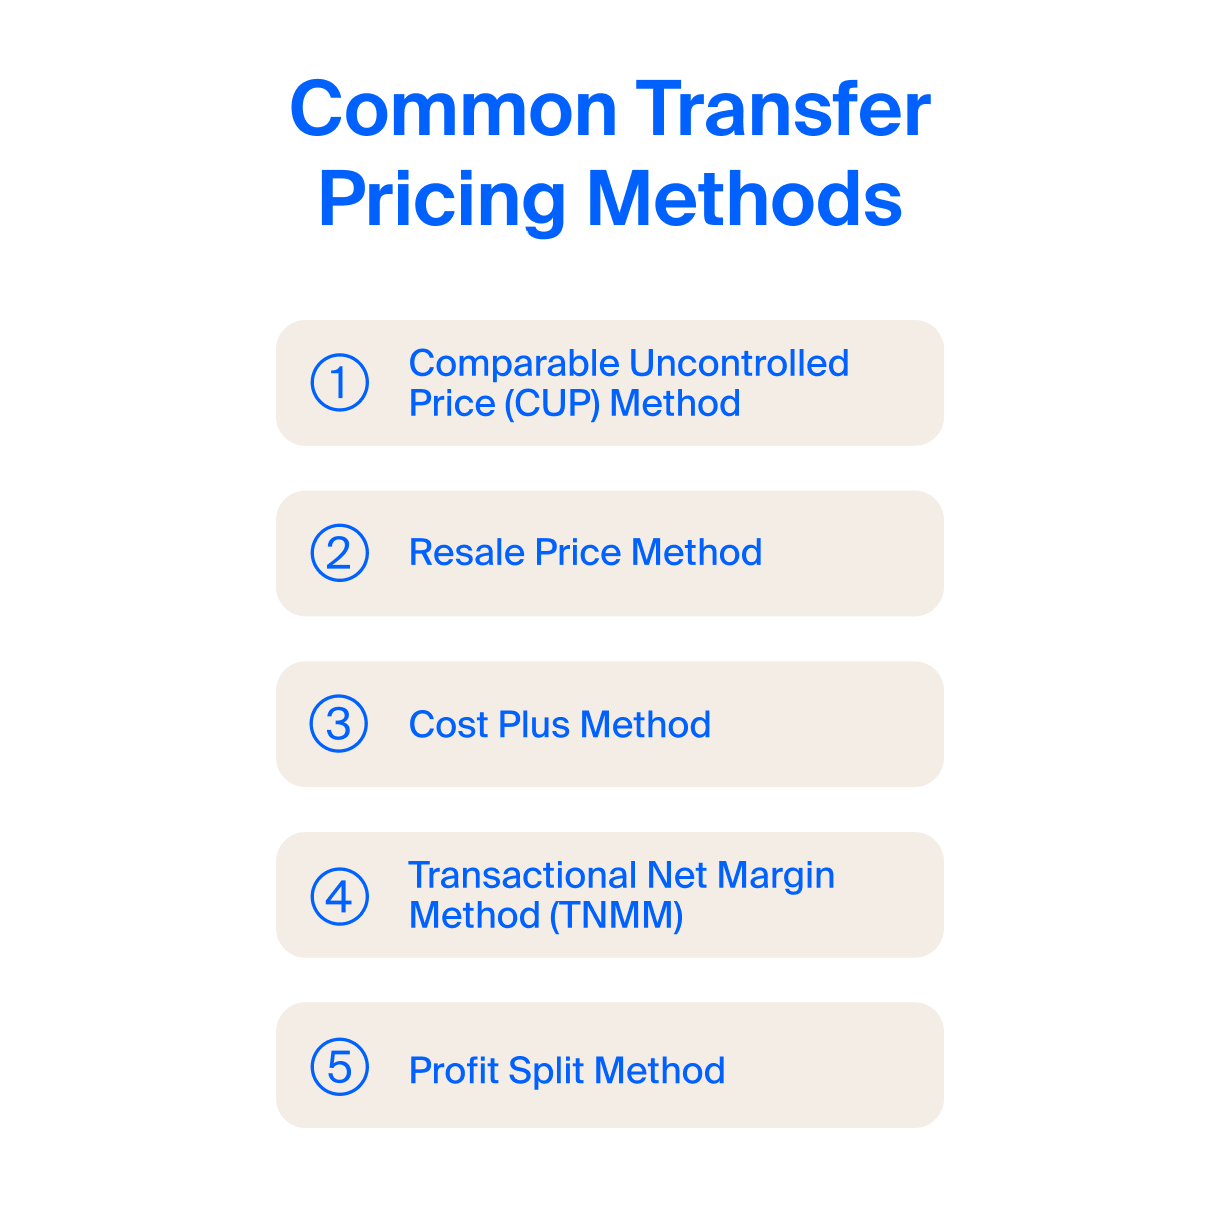 Common transfer pricing methods